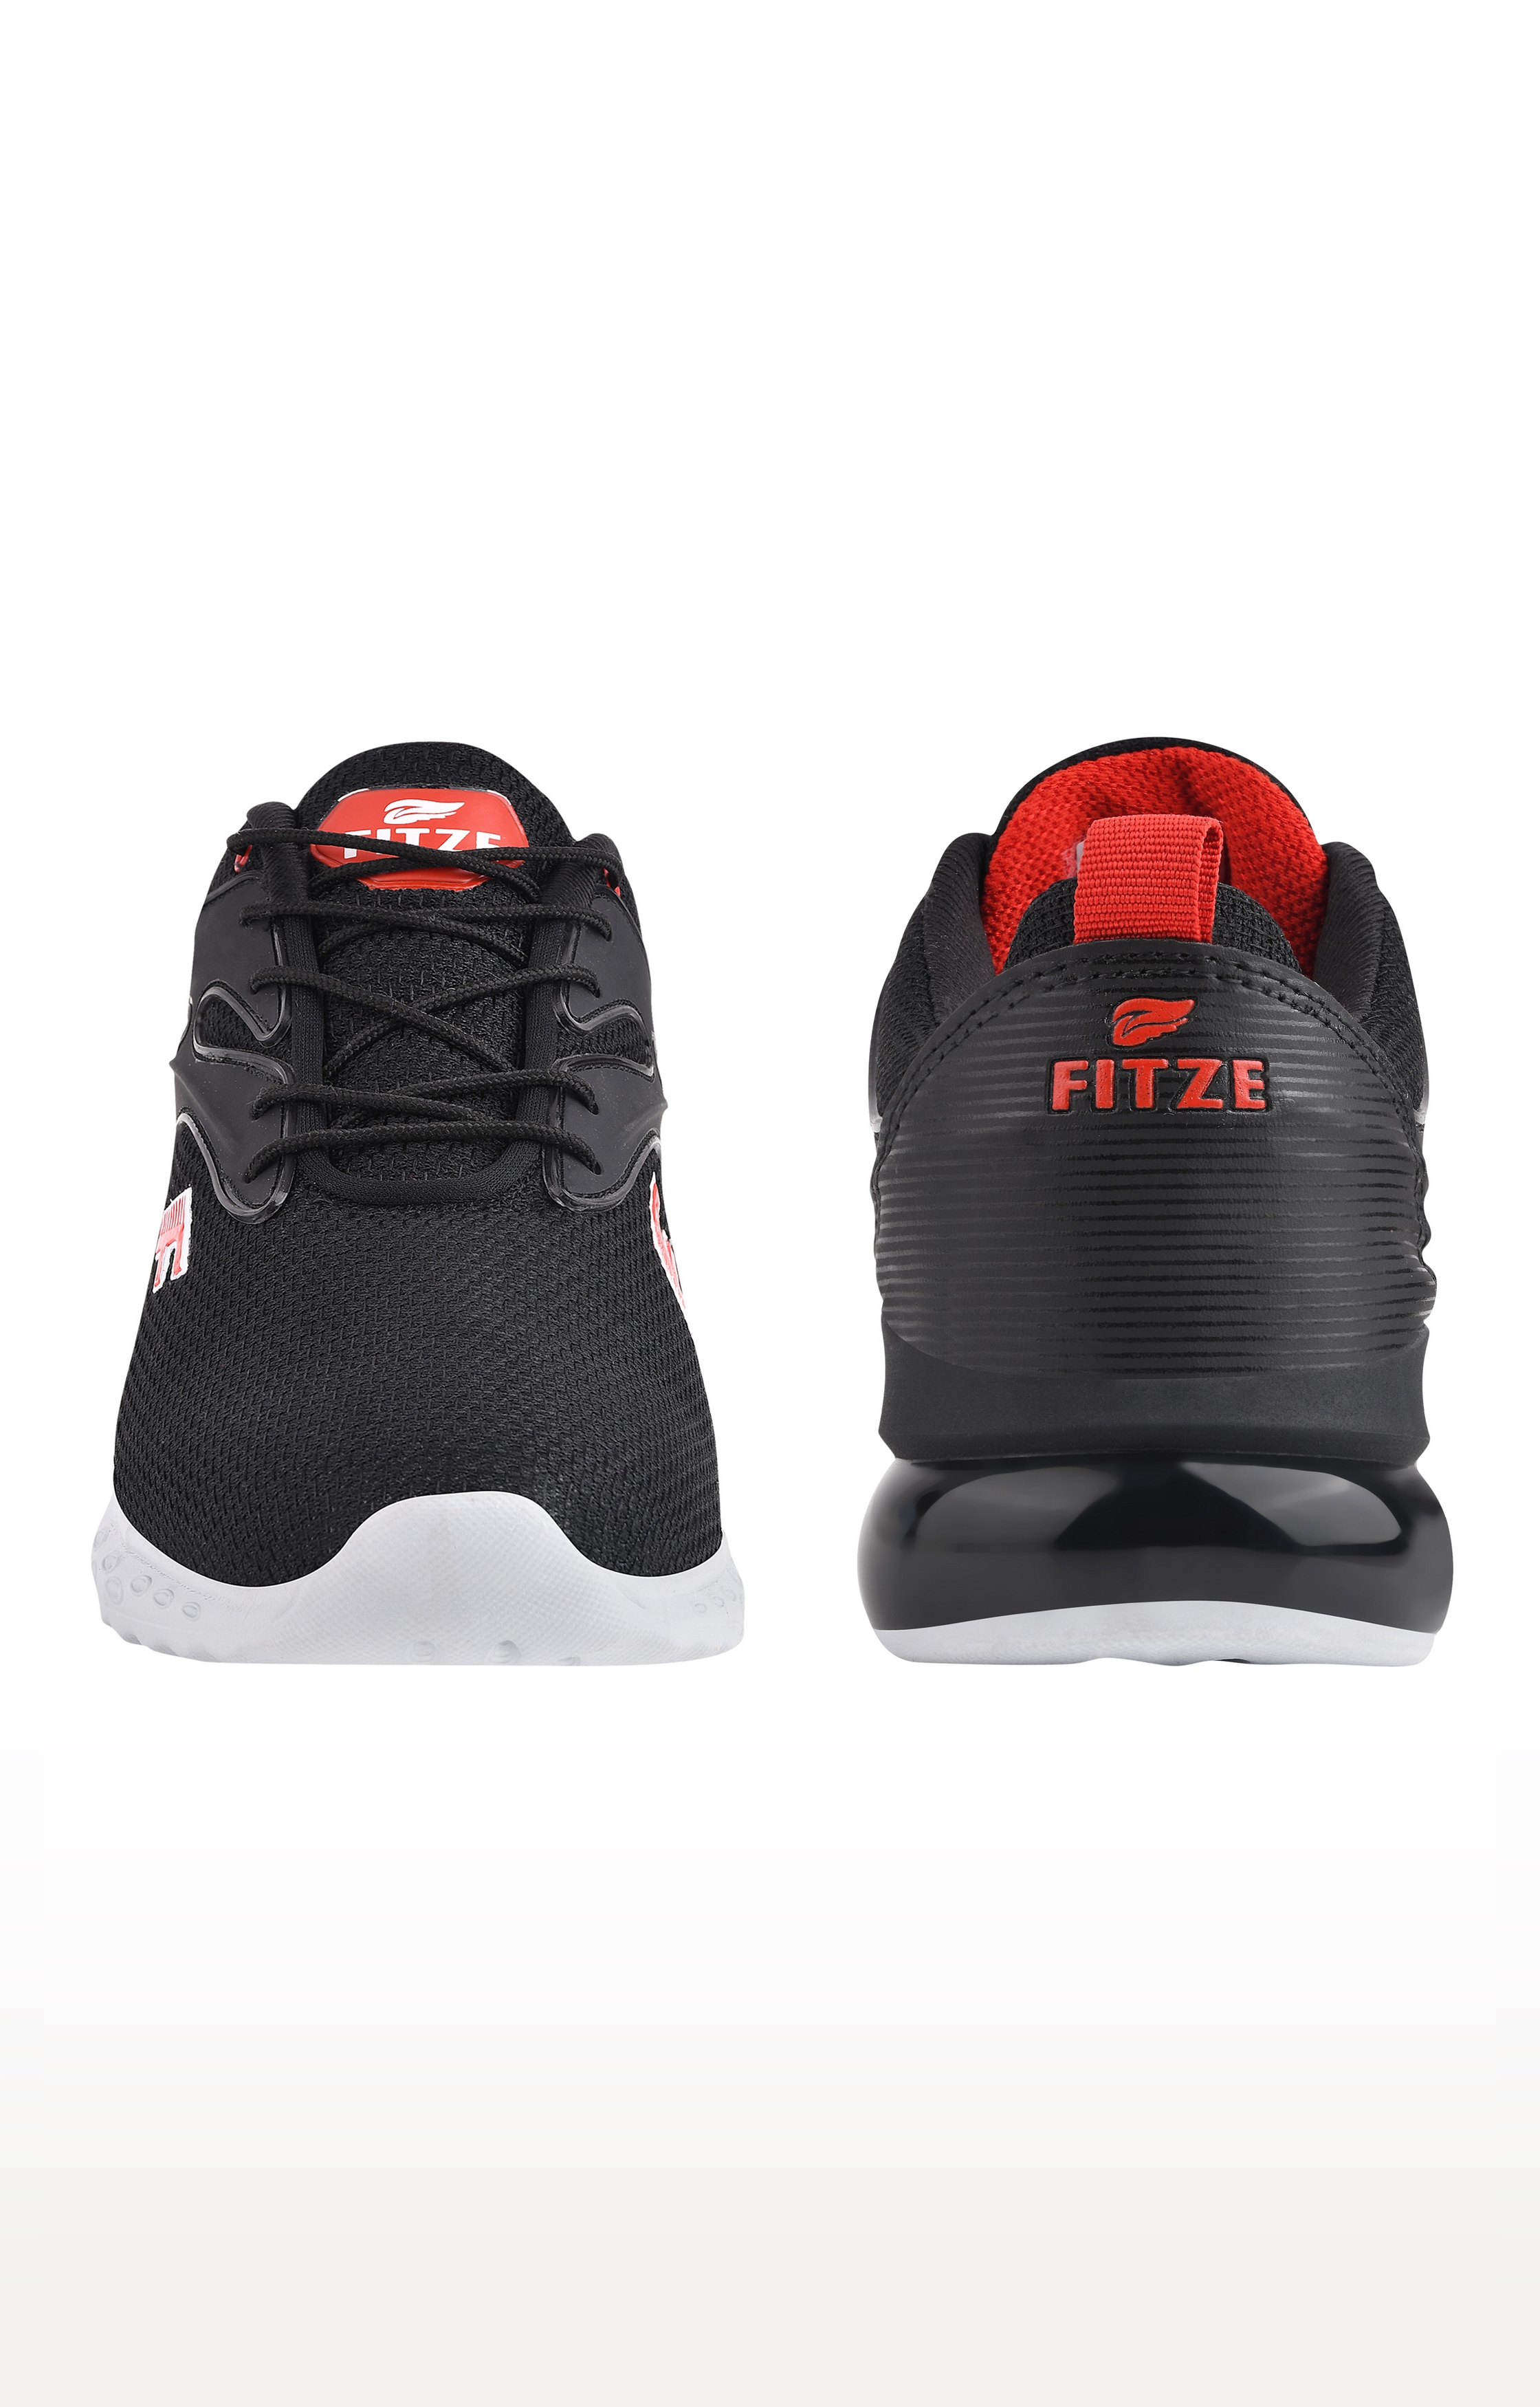 Black Running Shoes (FORCE_02_BLK_RED)